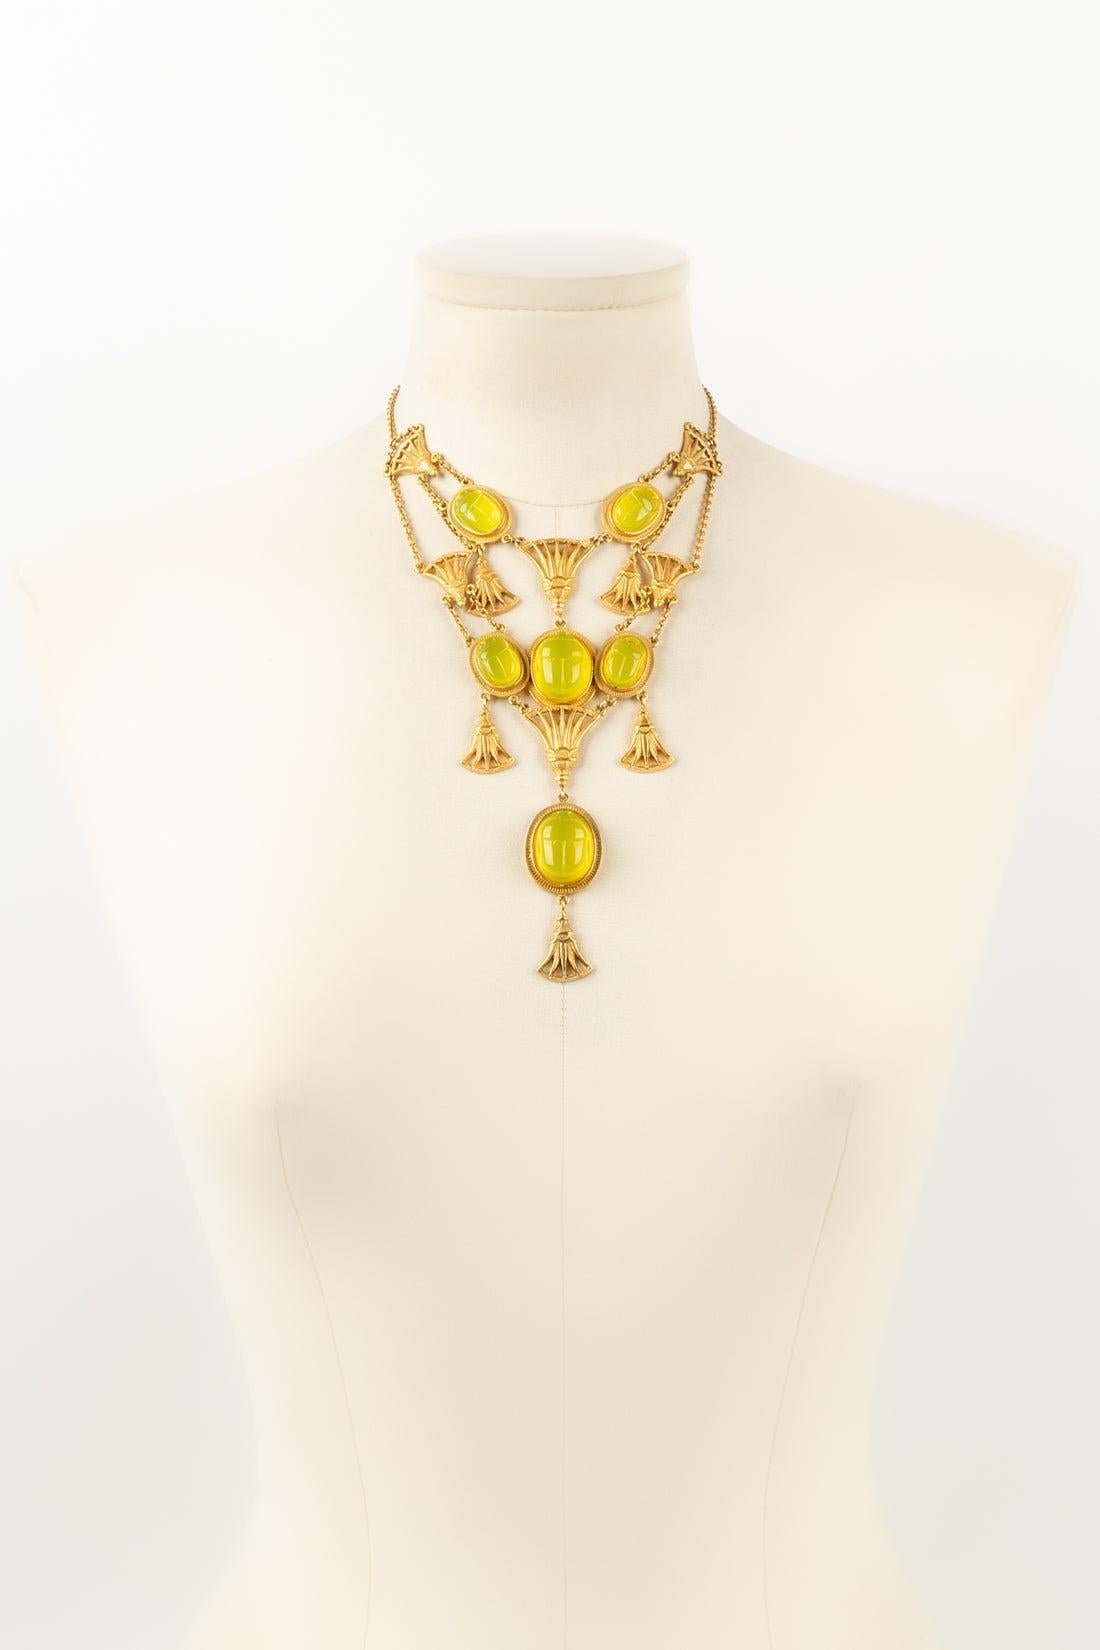 Christian Dior Necklace/Egyptian Jewelry, 2004 For Sale 9